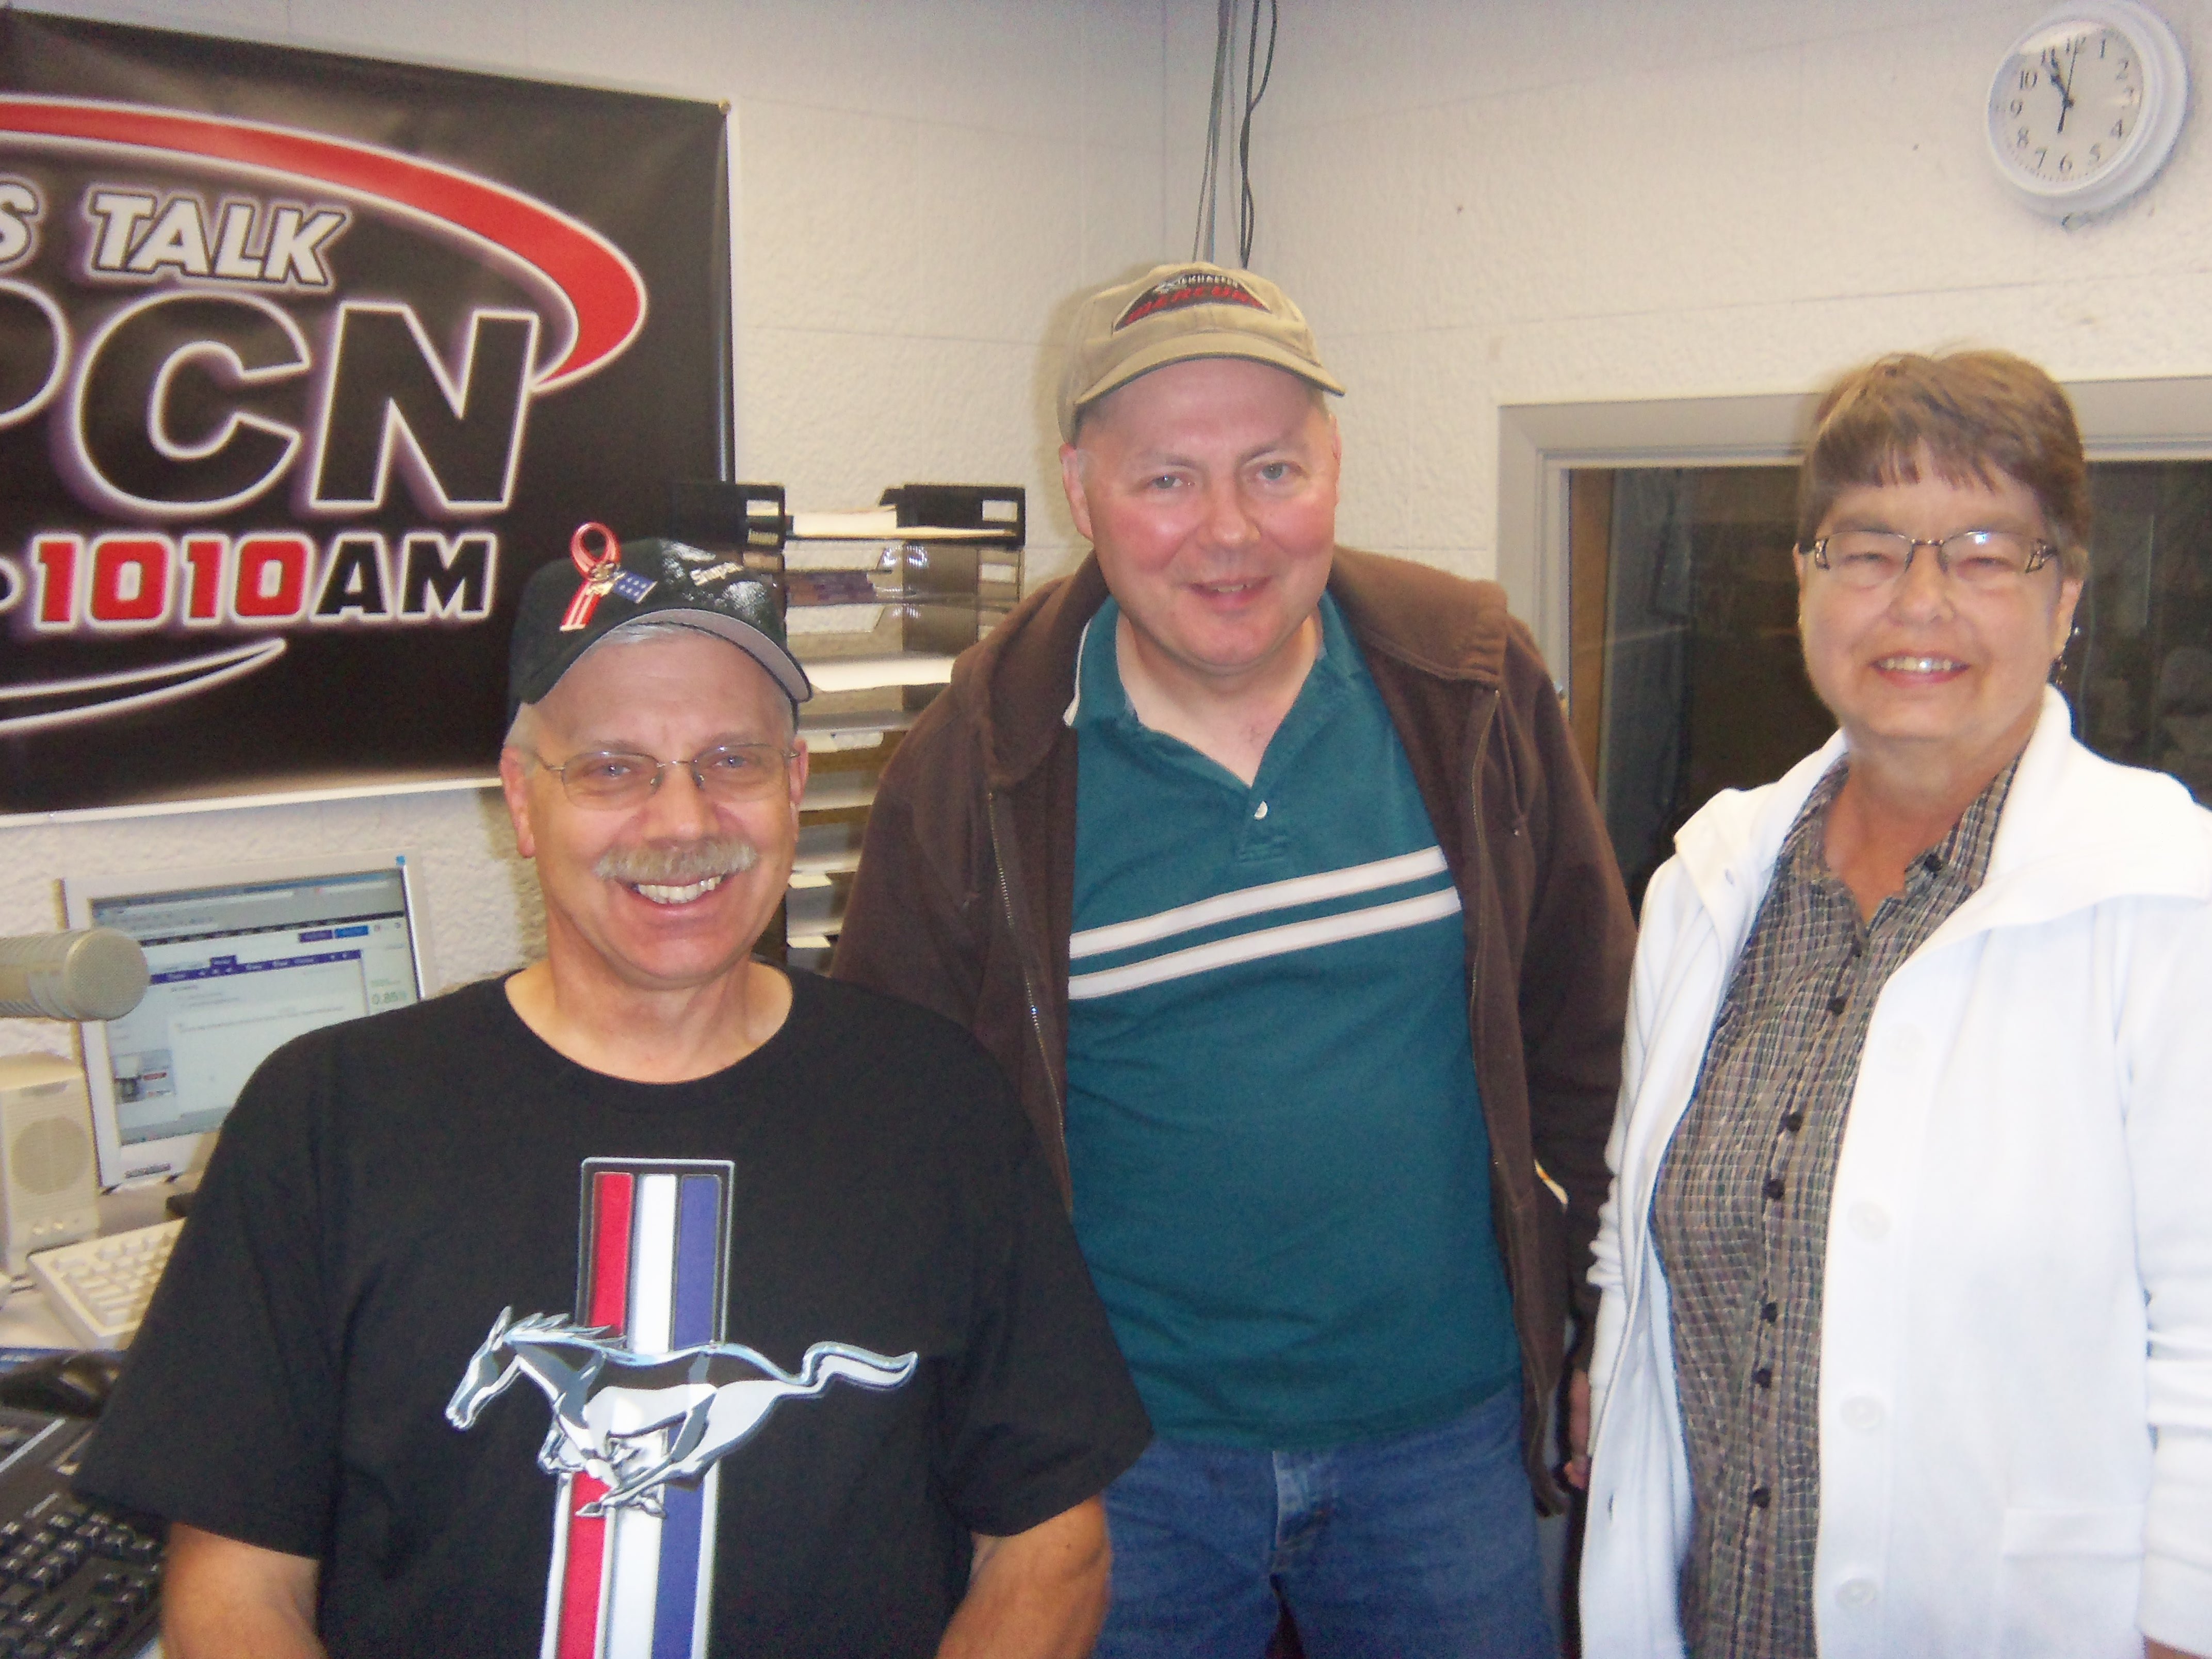 Don Wayerski and wife Karen at WPCN Radio in Stevens Point, WI